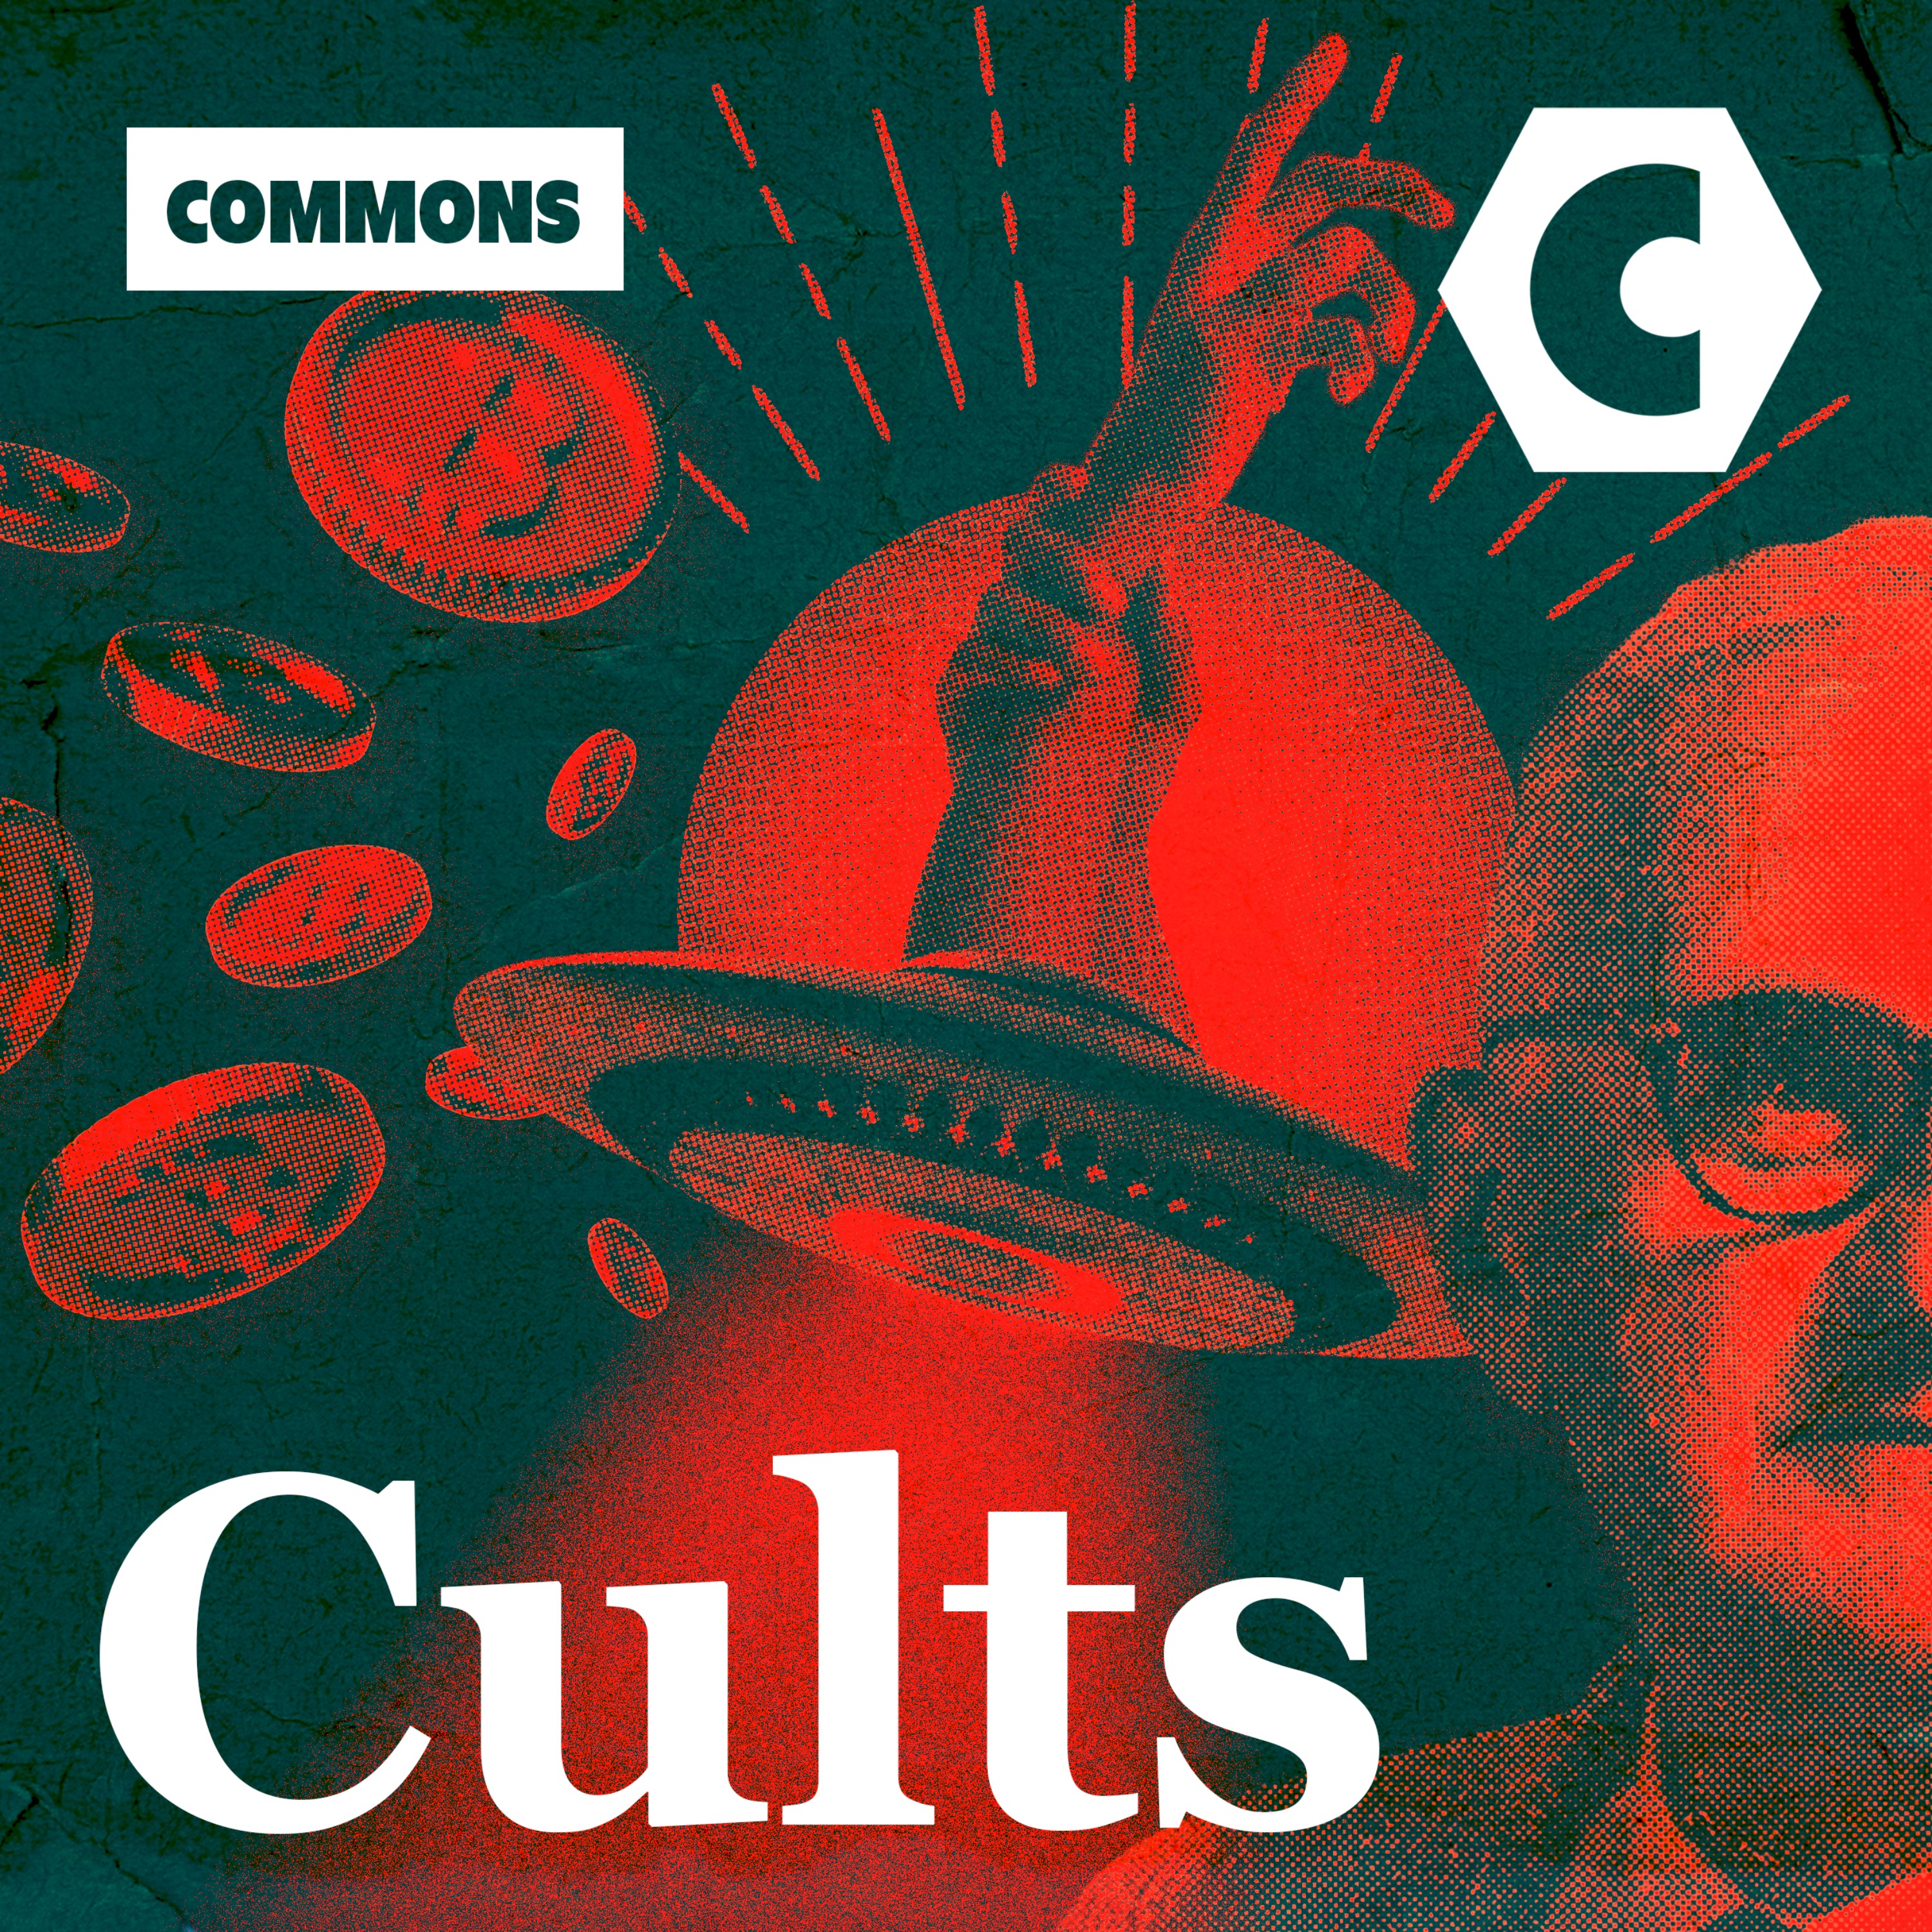 Introducing our new season… Cults